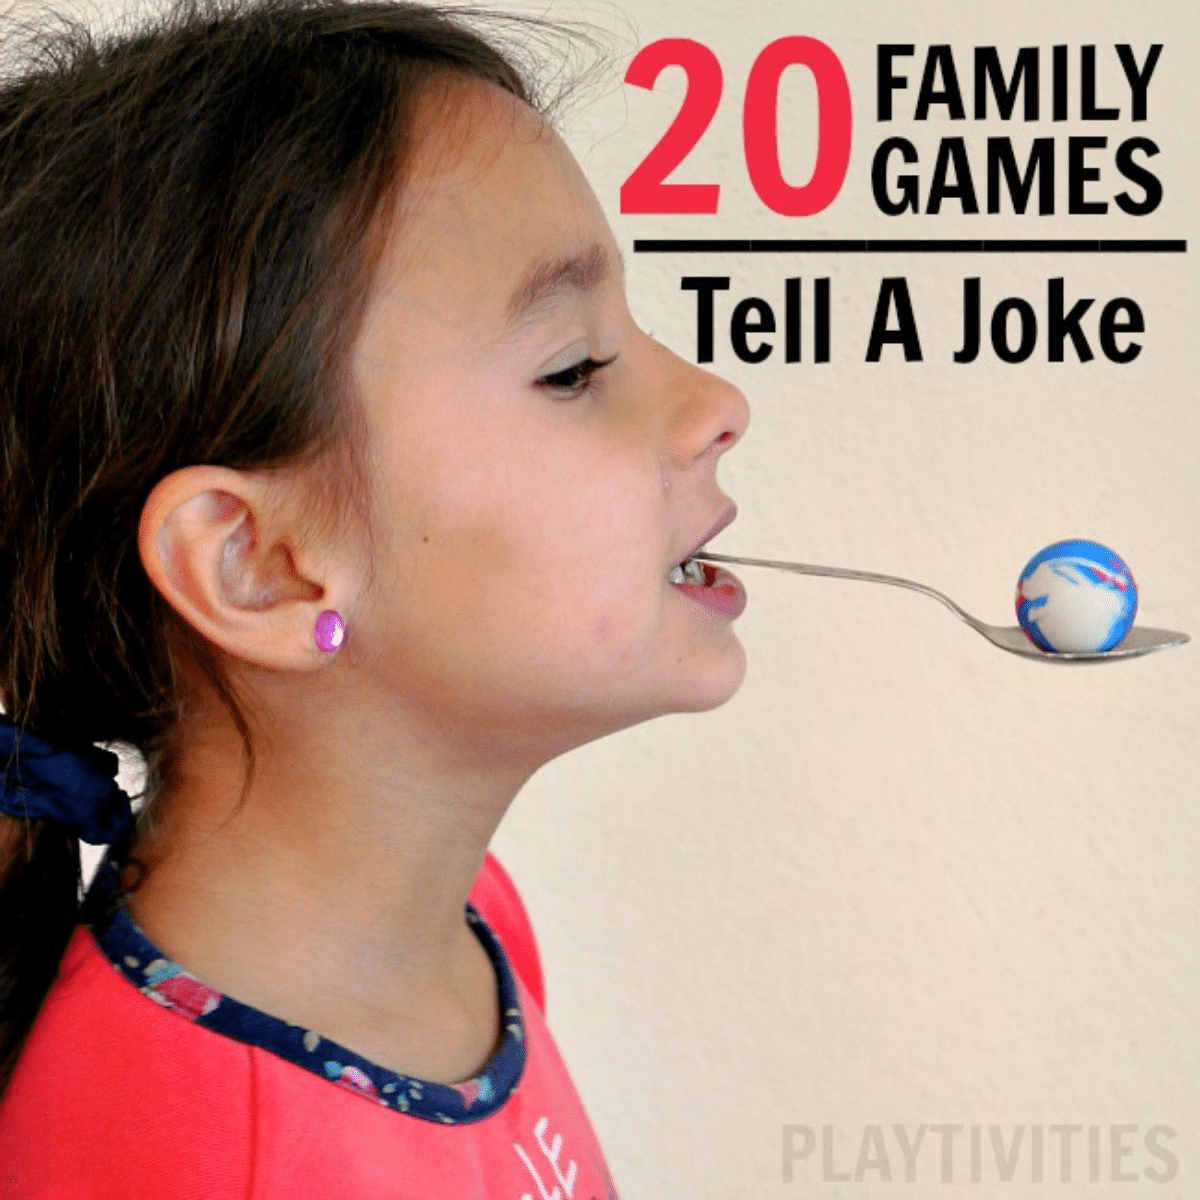  Minute of Fun Party Game - Amazing, 237 Minute to Win It Games,  Fun Games for Family Game Night, Activities for Teens, for Gifts, Home,  School Events, Travel, 2-12 Players, Easy